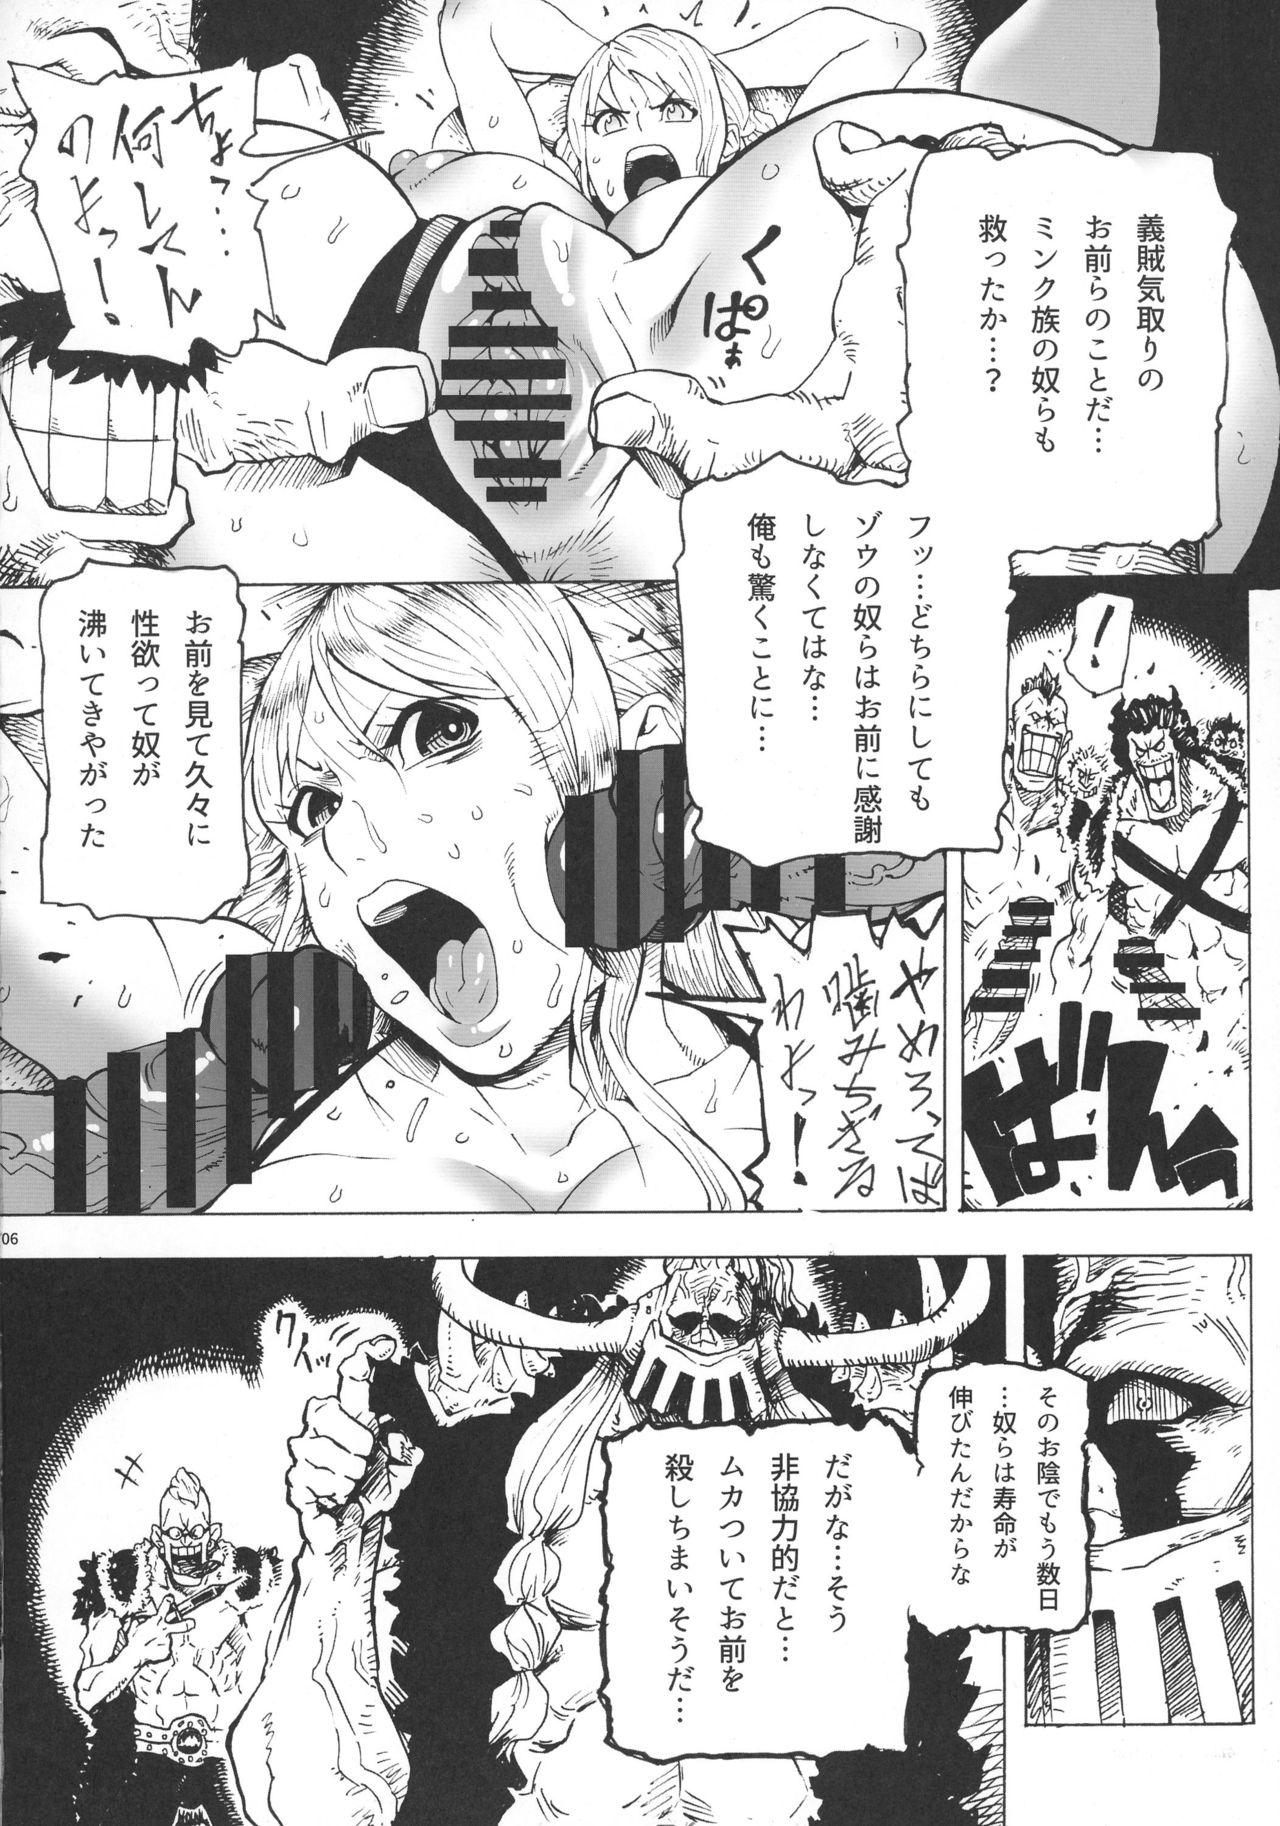 Bribe P.O.M Another Episode "J.A.C.K" - One piece Footjob - Page 8